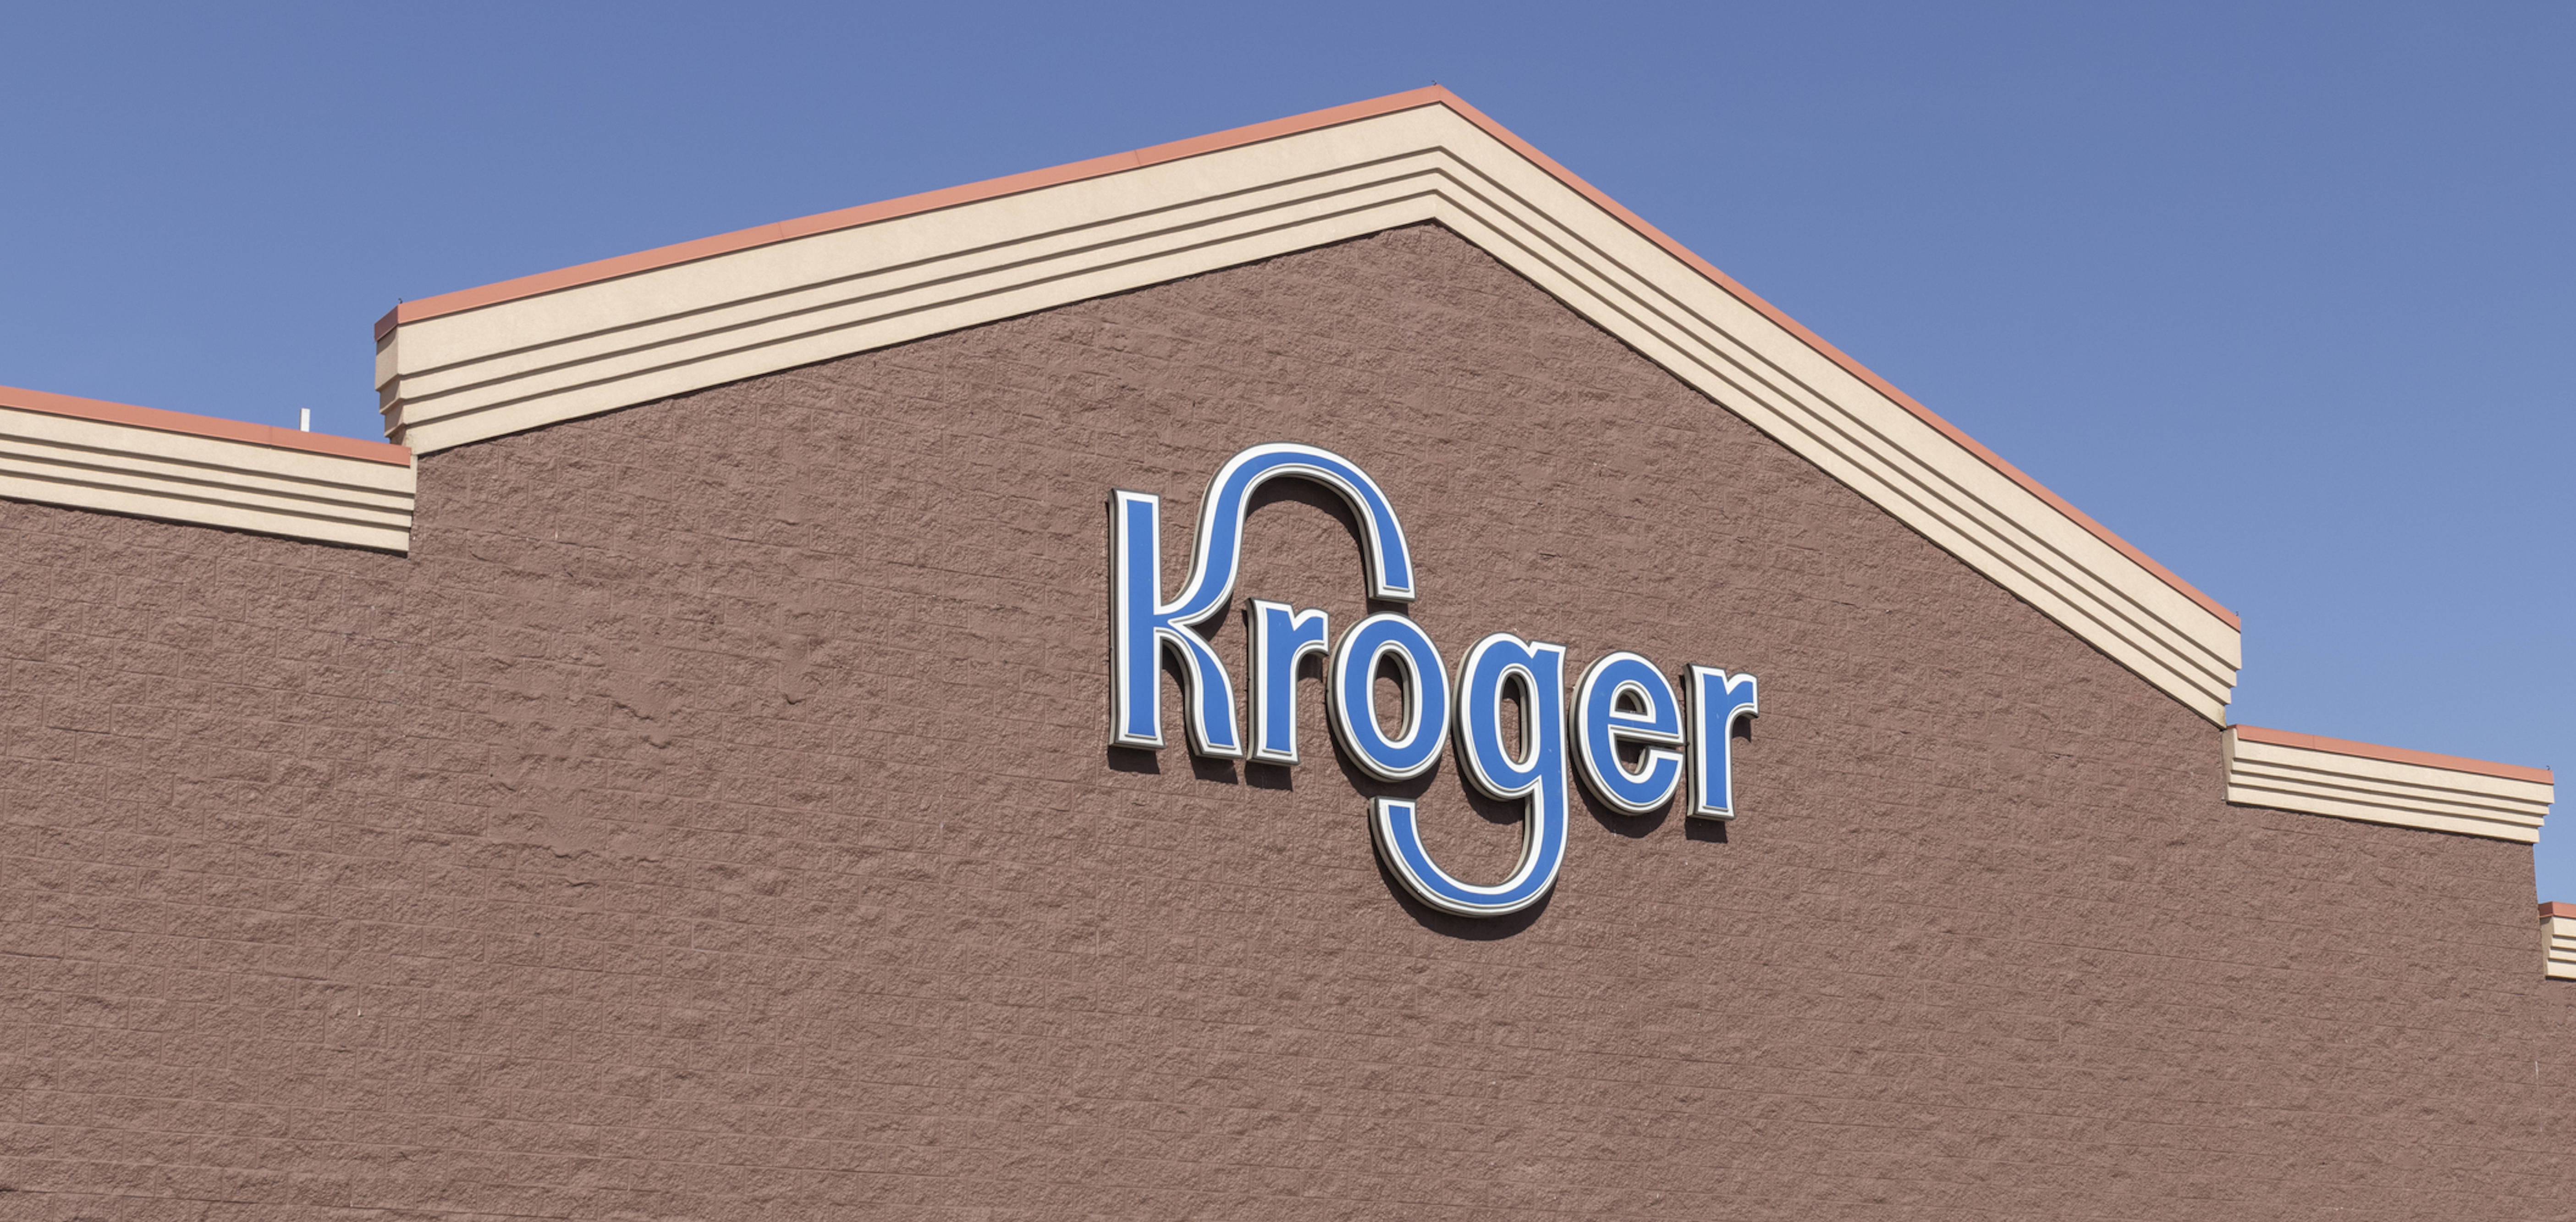 The exterior of a Kroger grocery store.